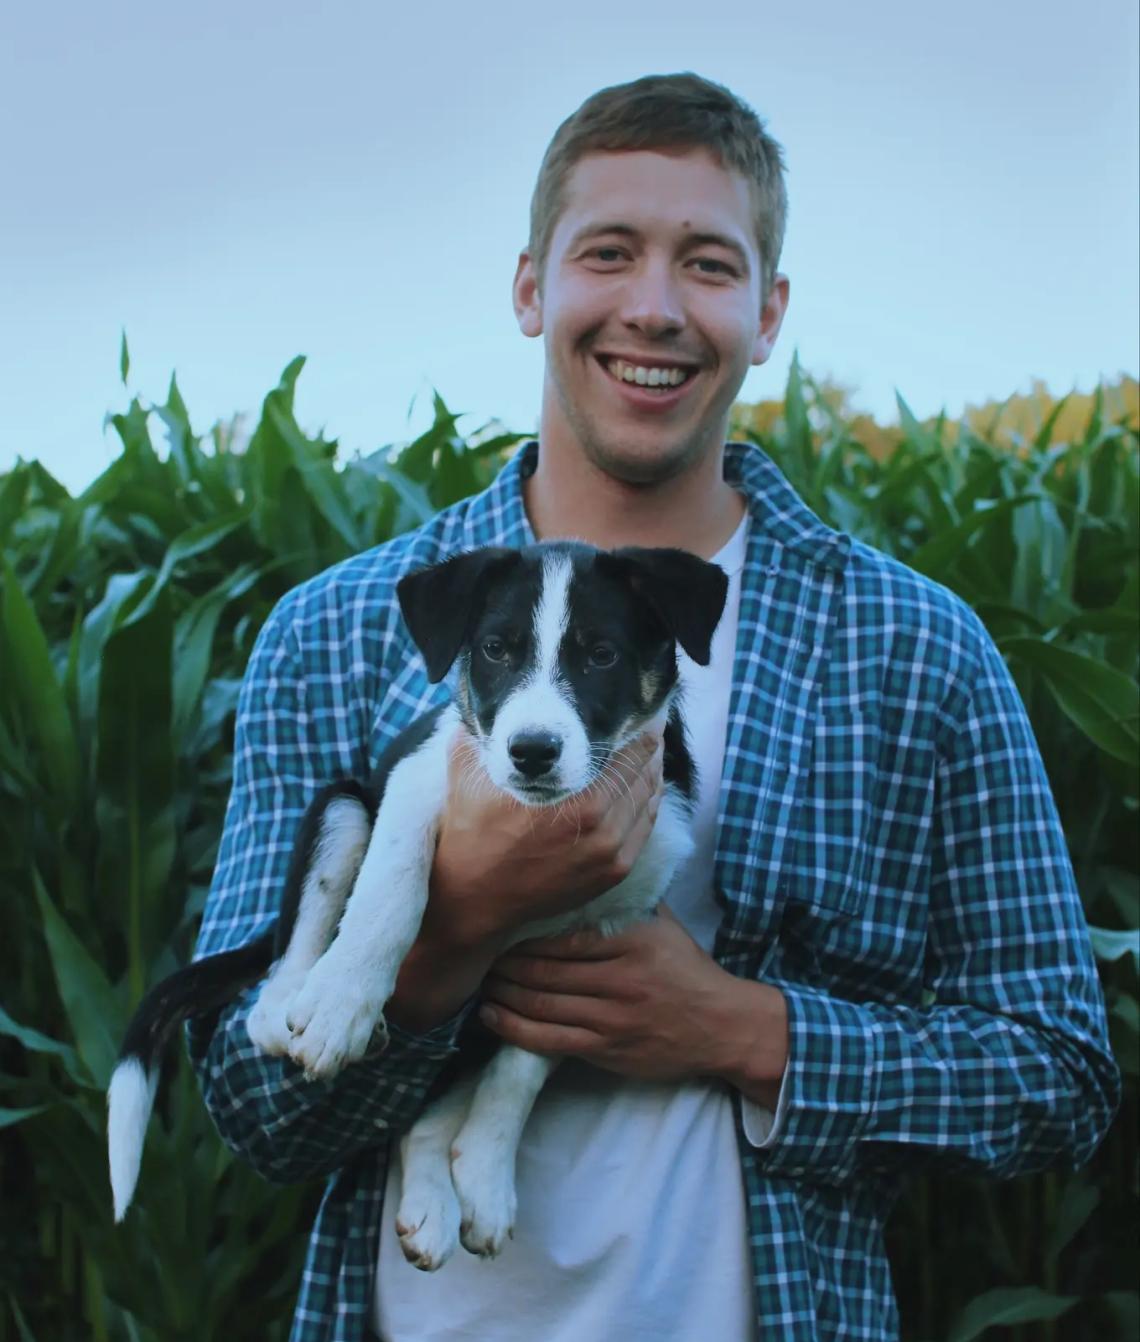 Douglas Groenendijk holds a black and white dog while standing in a field.